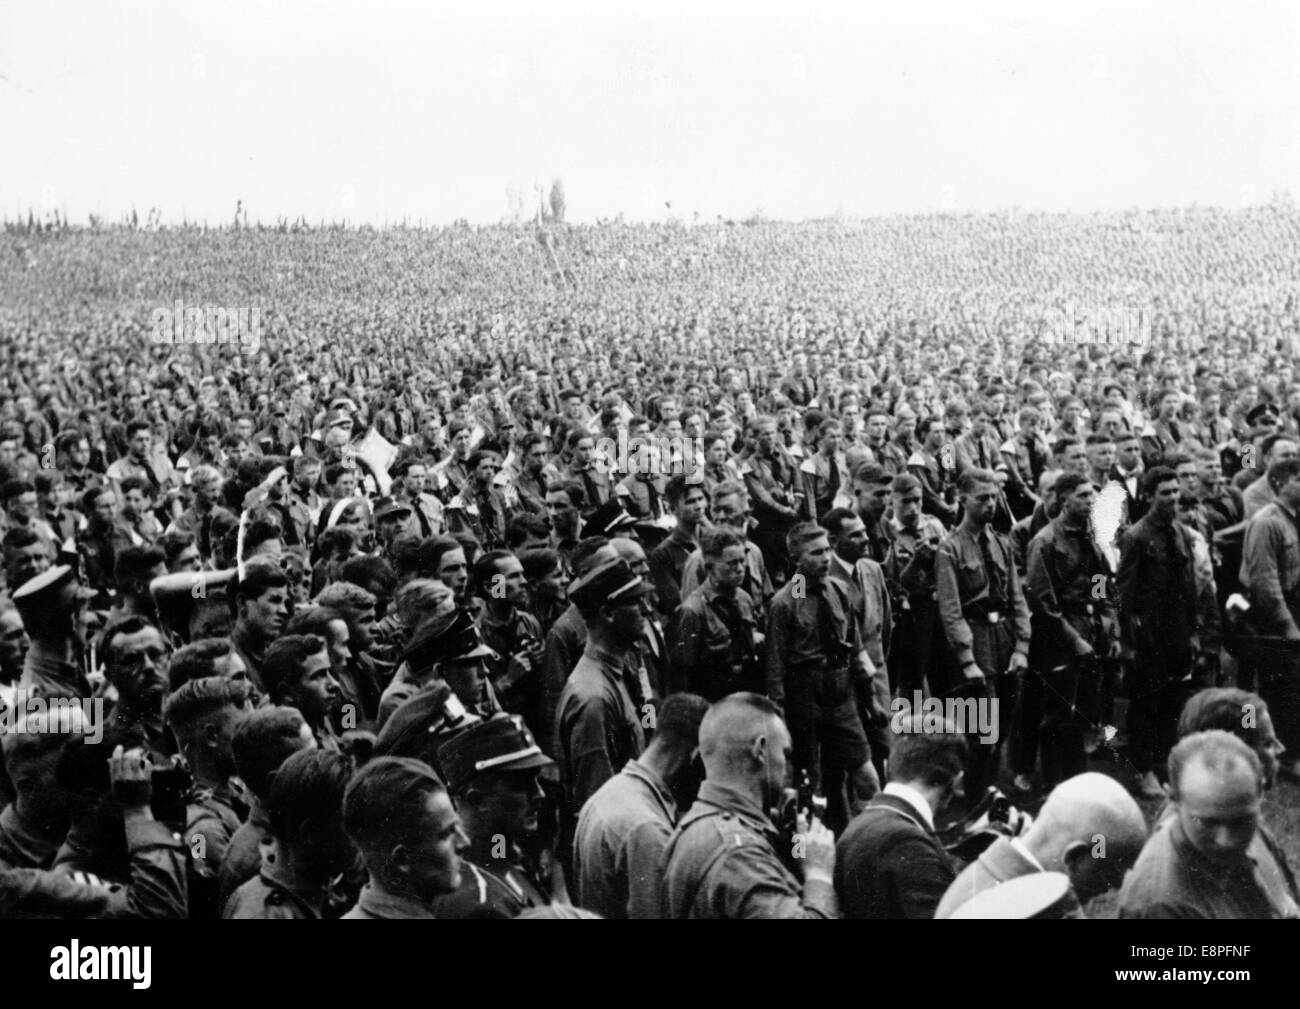 Nuremberg Rally 1933 in Nuremberg, Germany - Crowds of people at the Nazi party rally grounds. (Flaws in quality due to the historic picture copy) Fotoarchiv für Zeitgeschichtee - NO WIRE SERVICE - Stock Photo